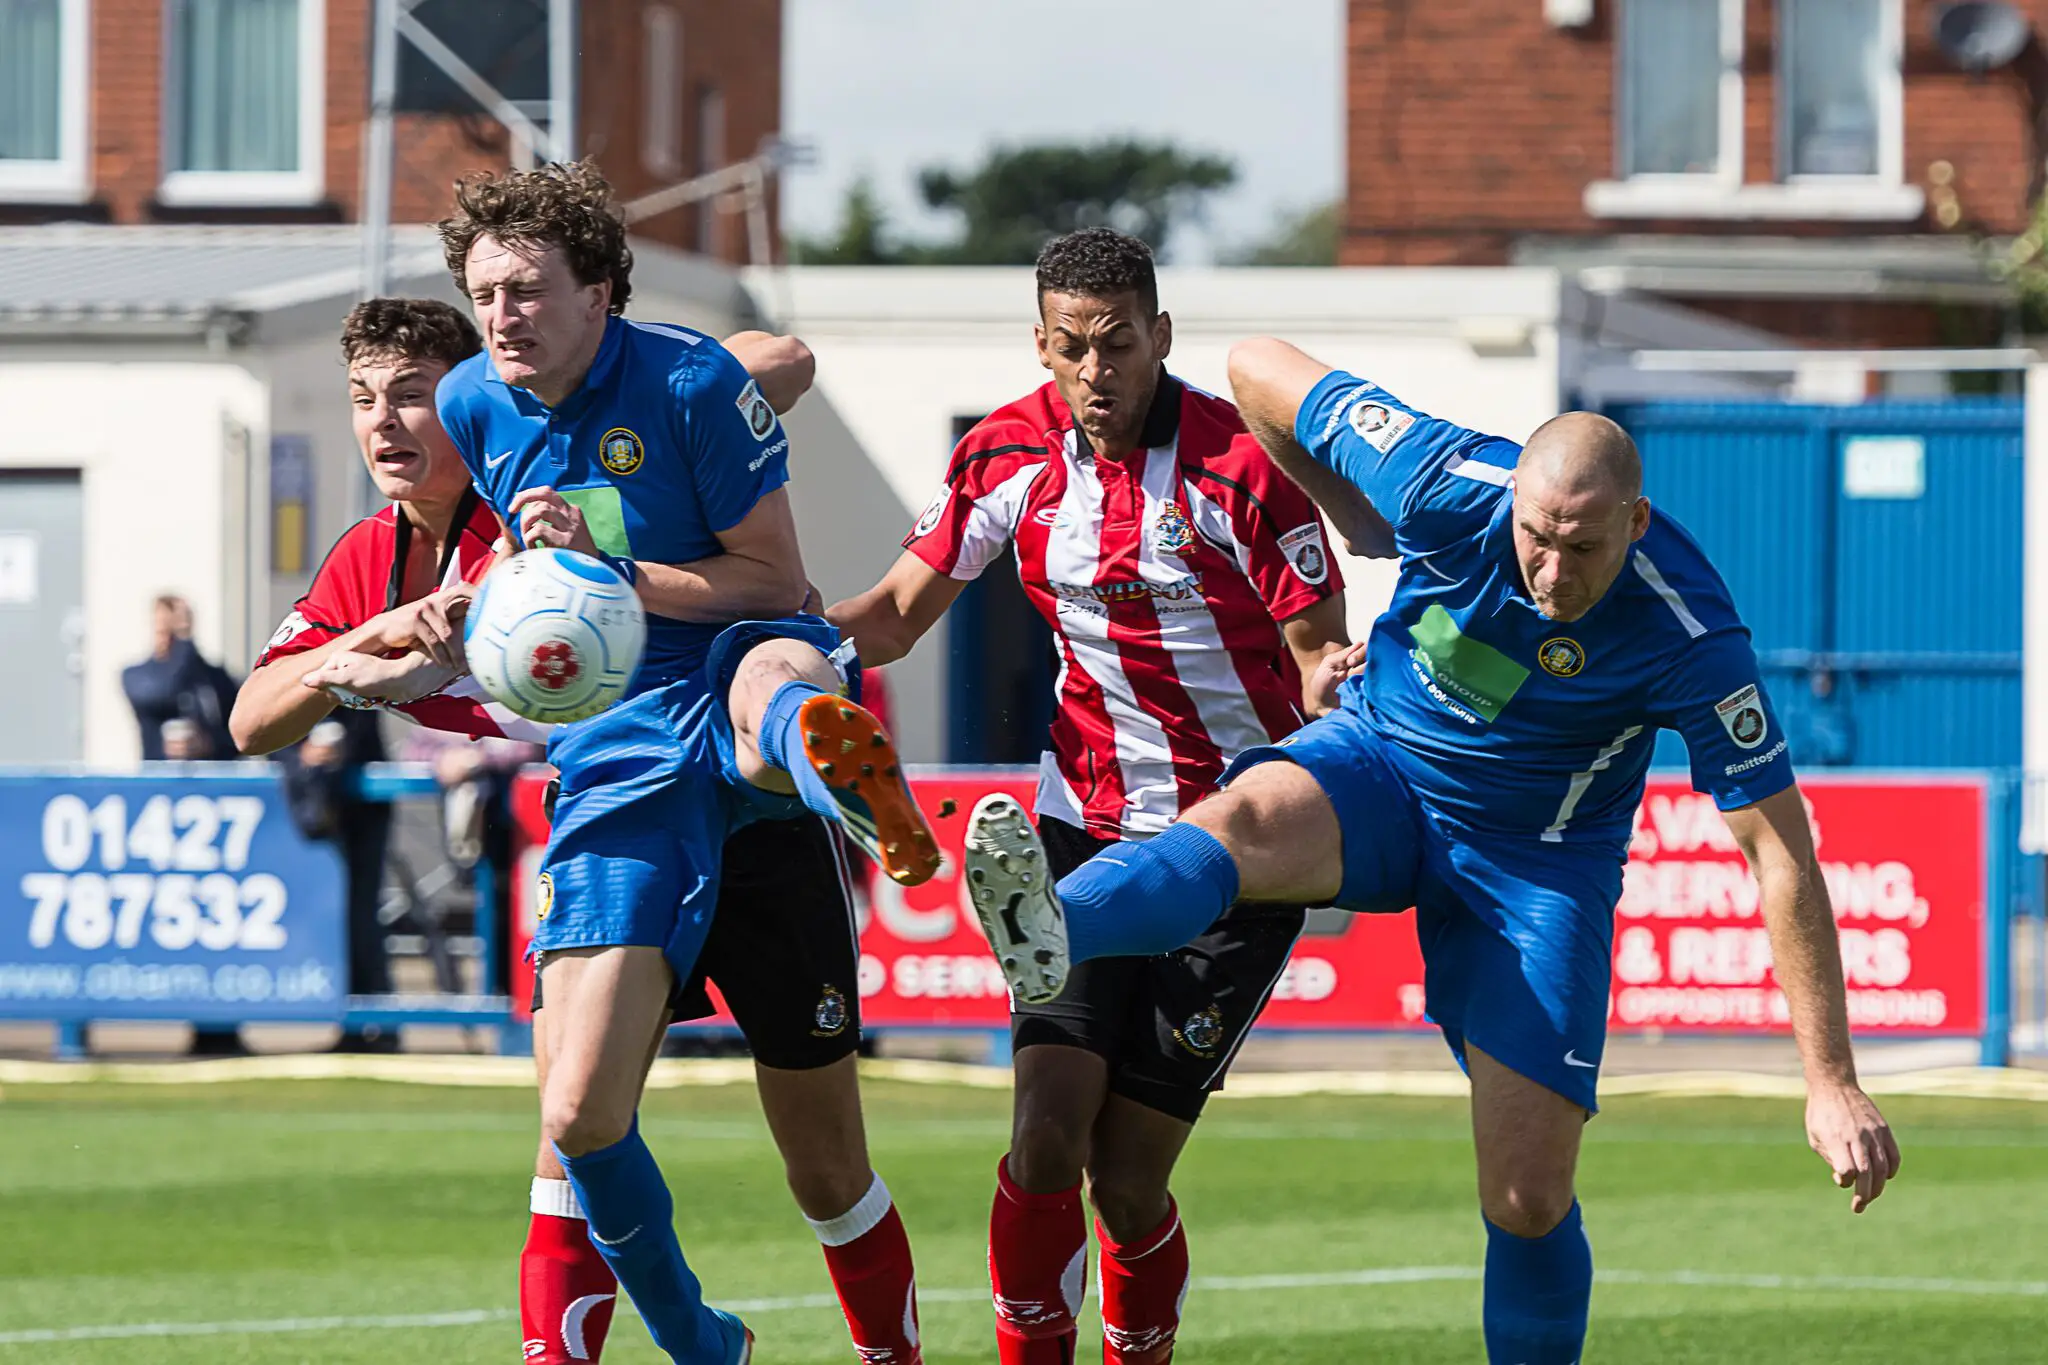 Action from the Robins' defeat at Gainsborough Trinity last weekend